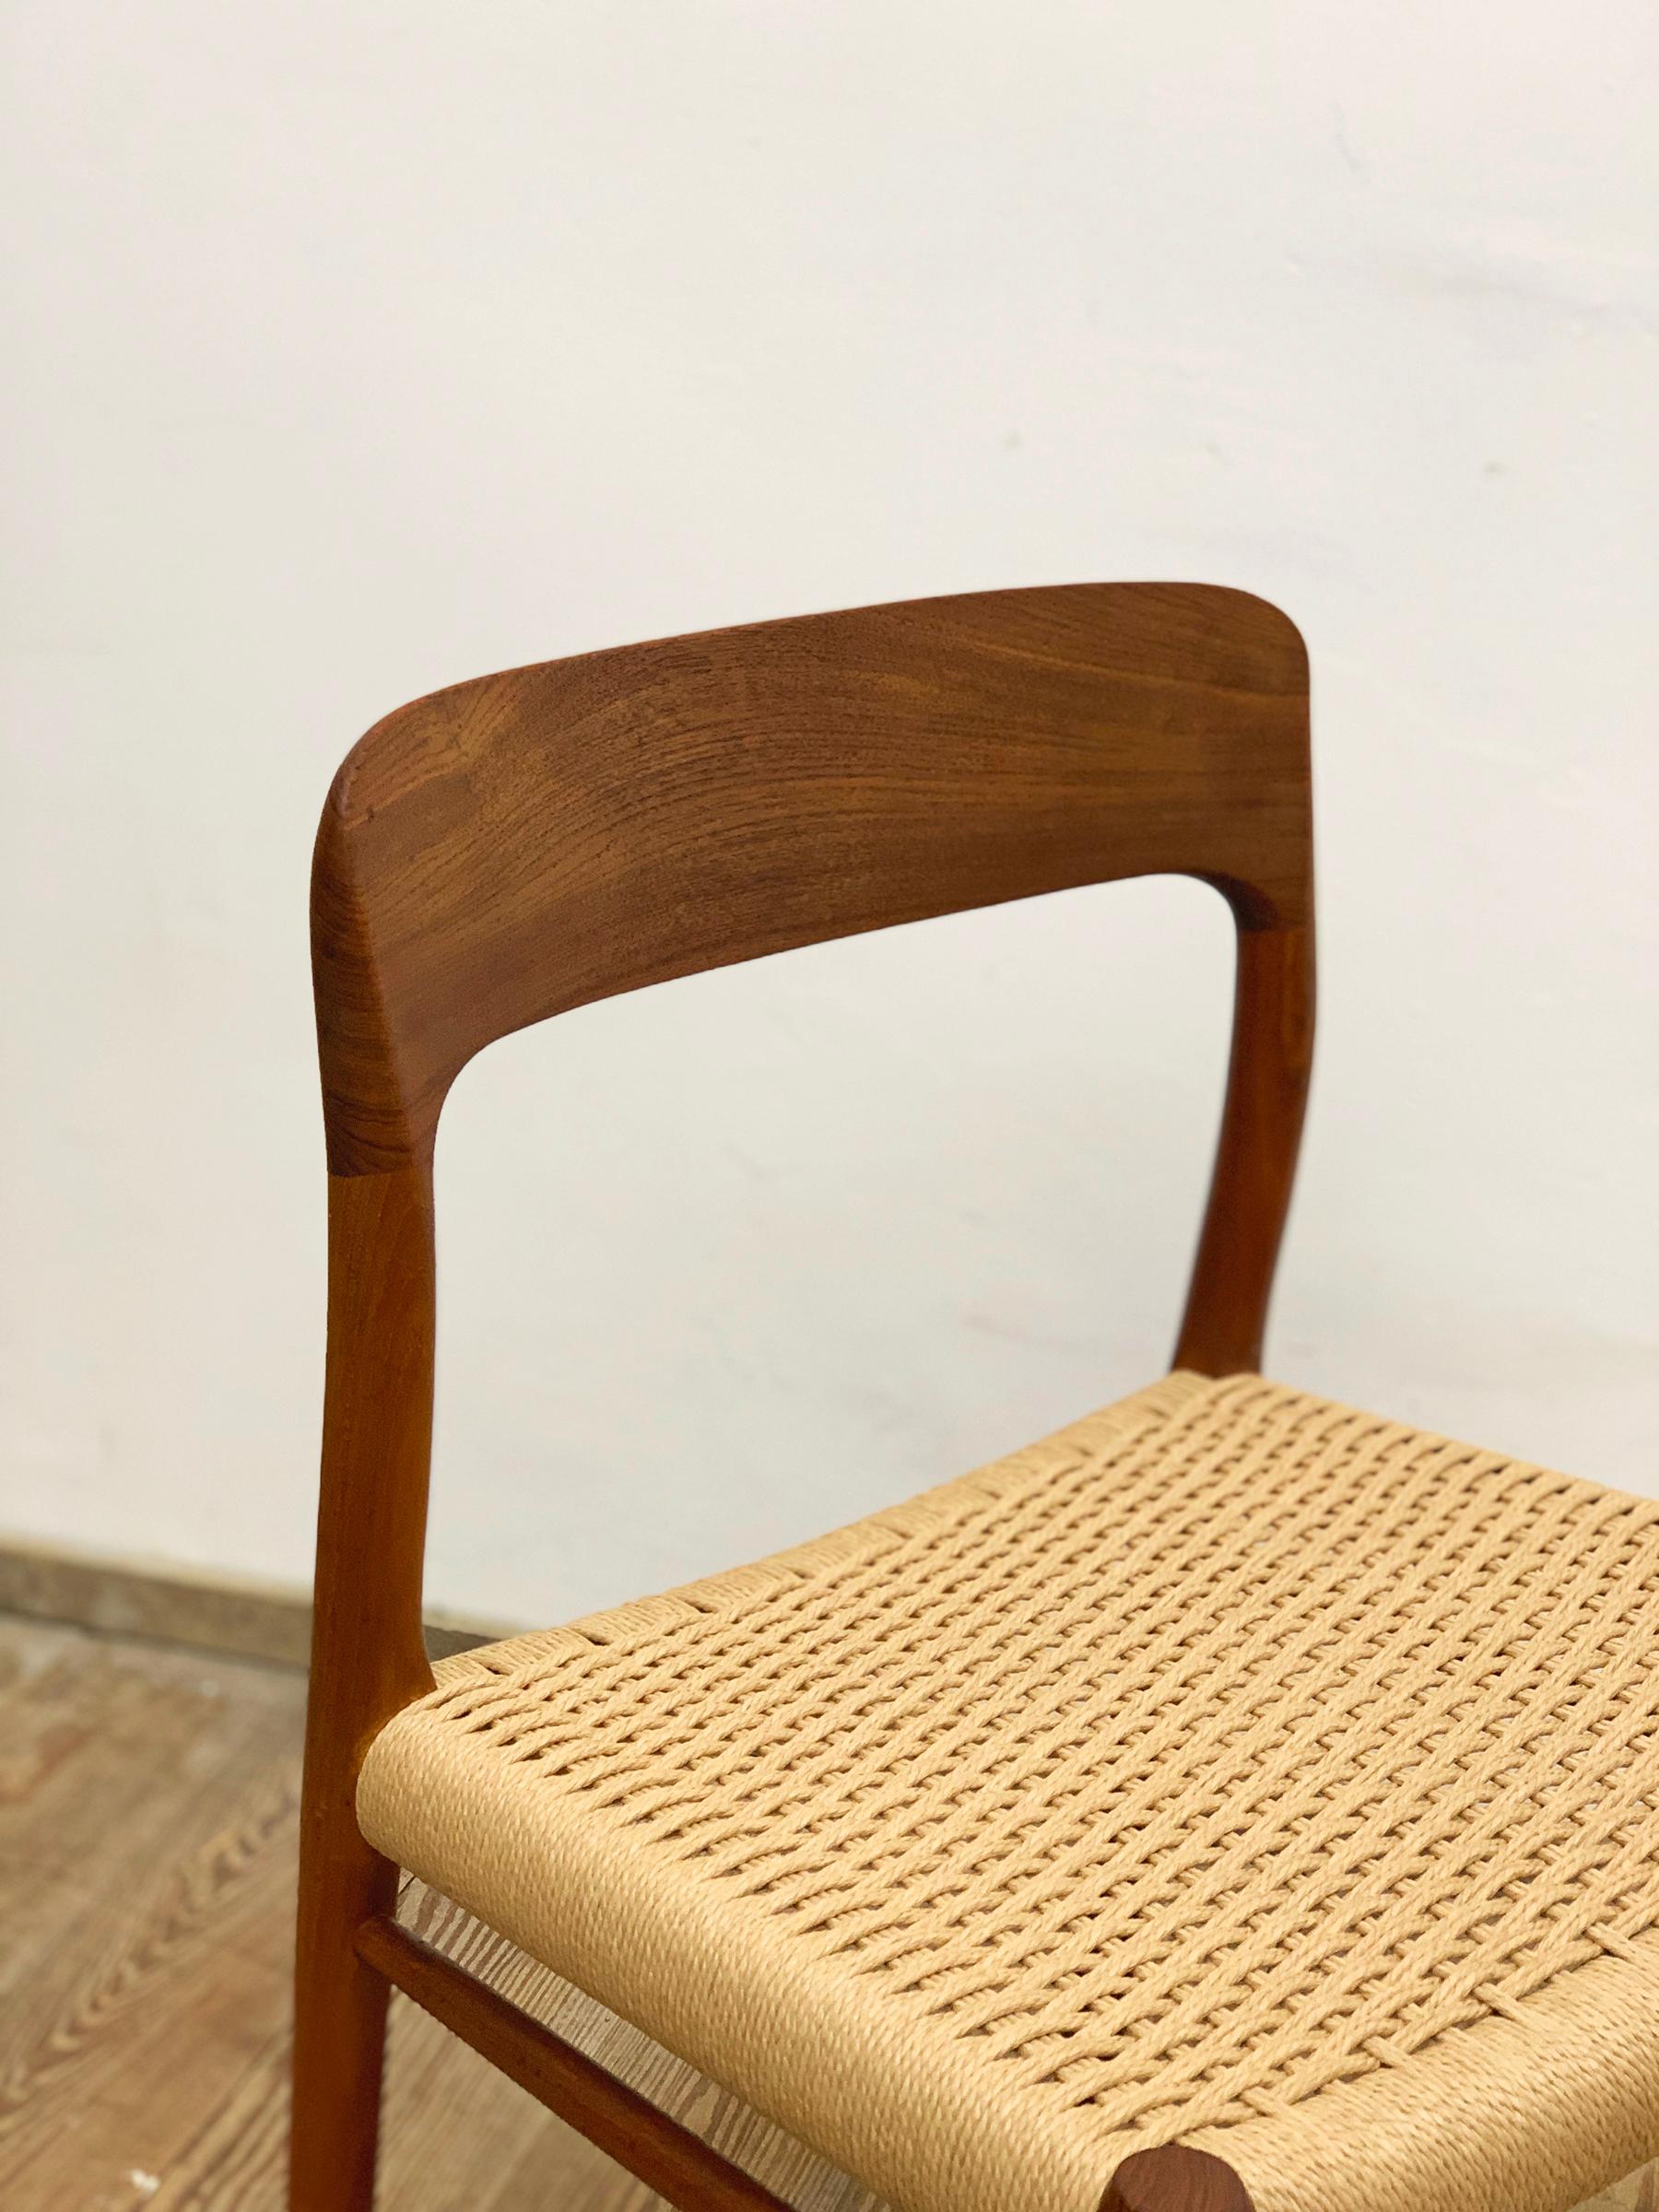 Mid-Century Teak Dining or Side Chair #75 by Niels O. Møller for J. L. Moller In Good Condition For Sale In München, Bavaria